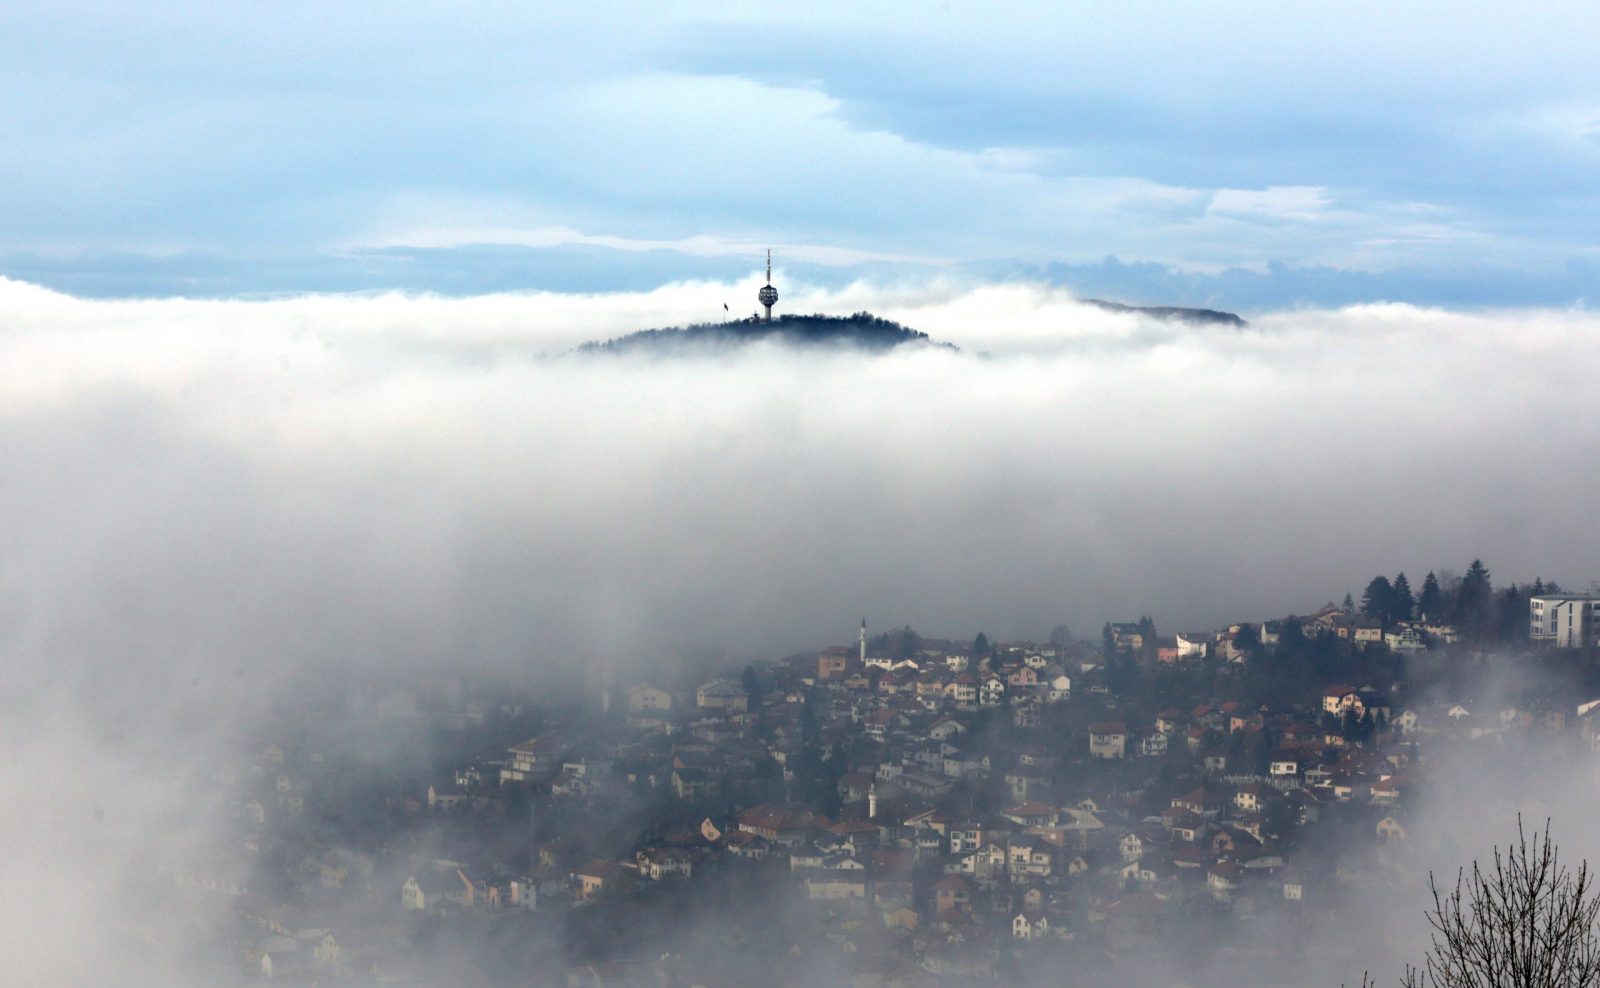 epa10345834 A television tower on a mountain peak pokes out of a low layer of fog covering the surroundings of the city of Sarajevo, Bosnia and Herzegovina, 03 December 2022. With an AQI (Air Quality Index) of 163, which is labelled as 'unhealty', the Bosinan capital is among the most polluted cities in the world, ranking on 6th place on 03 December 2022.  EPA/FEHIM DEMIR